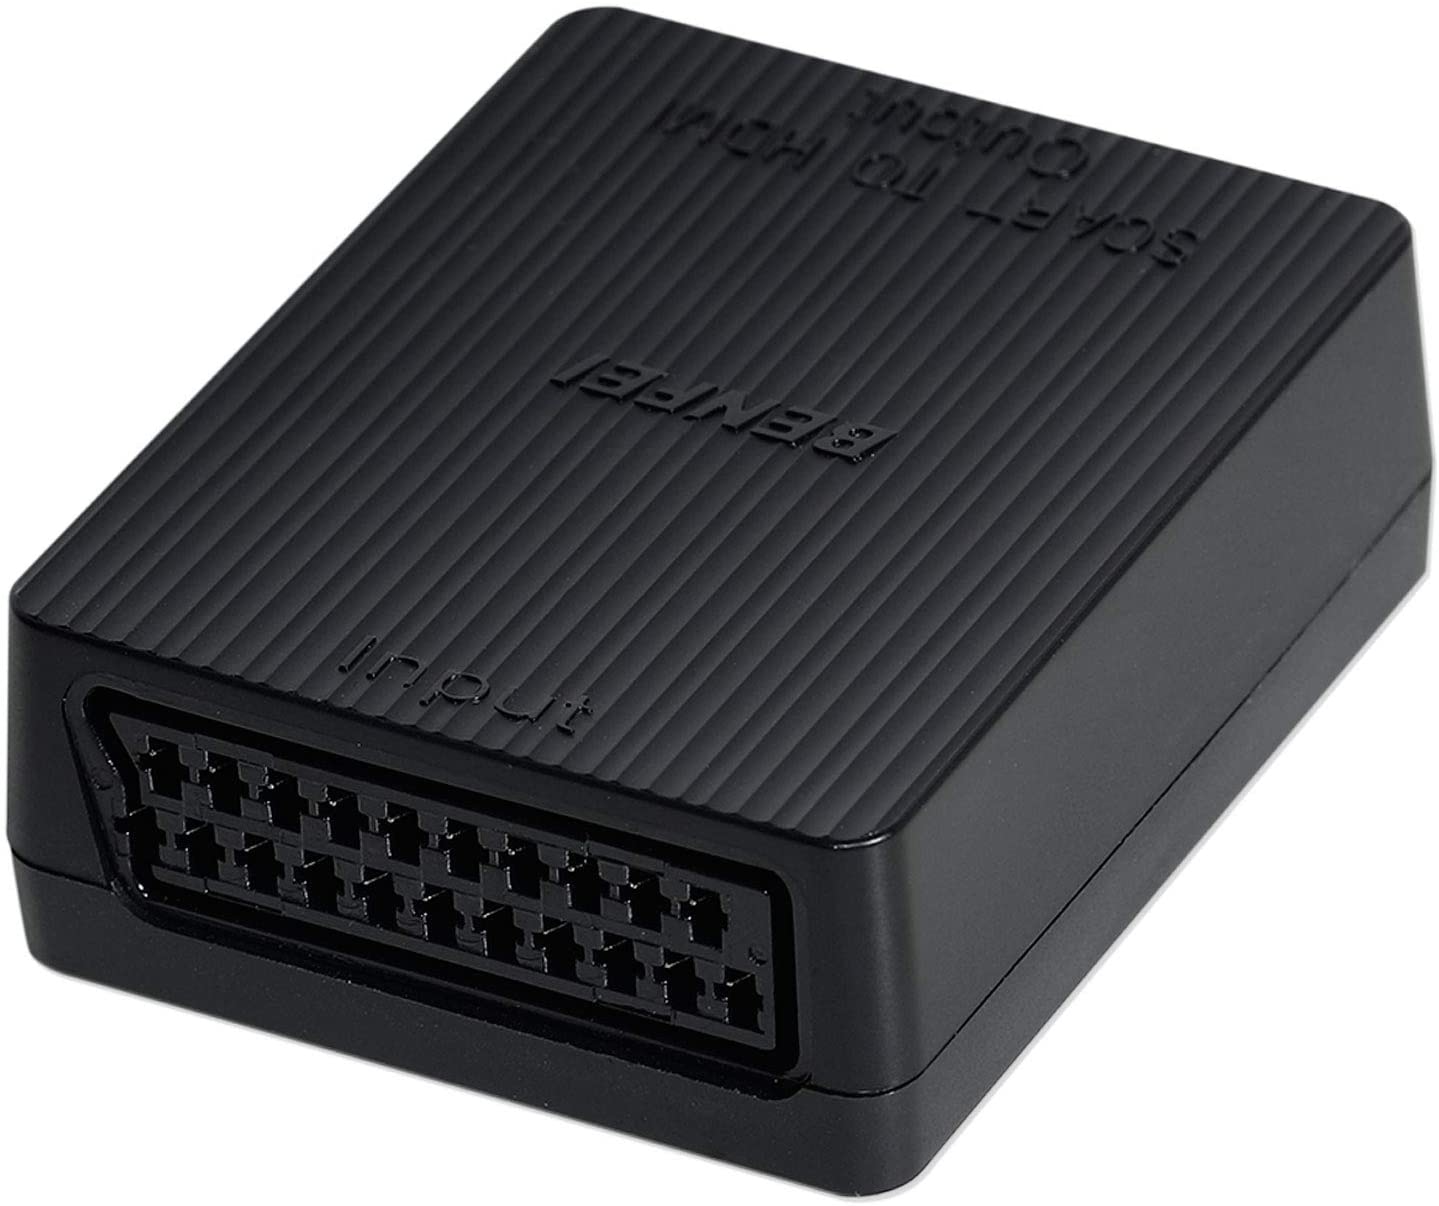 SCART to HDMI, BENFEI SCART Composite AV/S-video to HDMI Adapter Supports PAL/NTSC